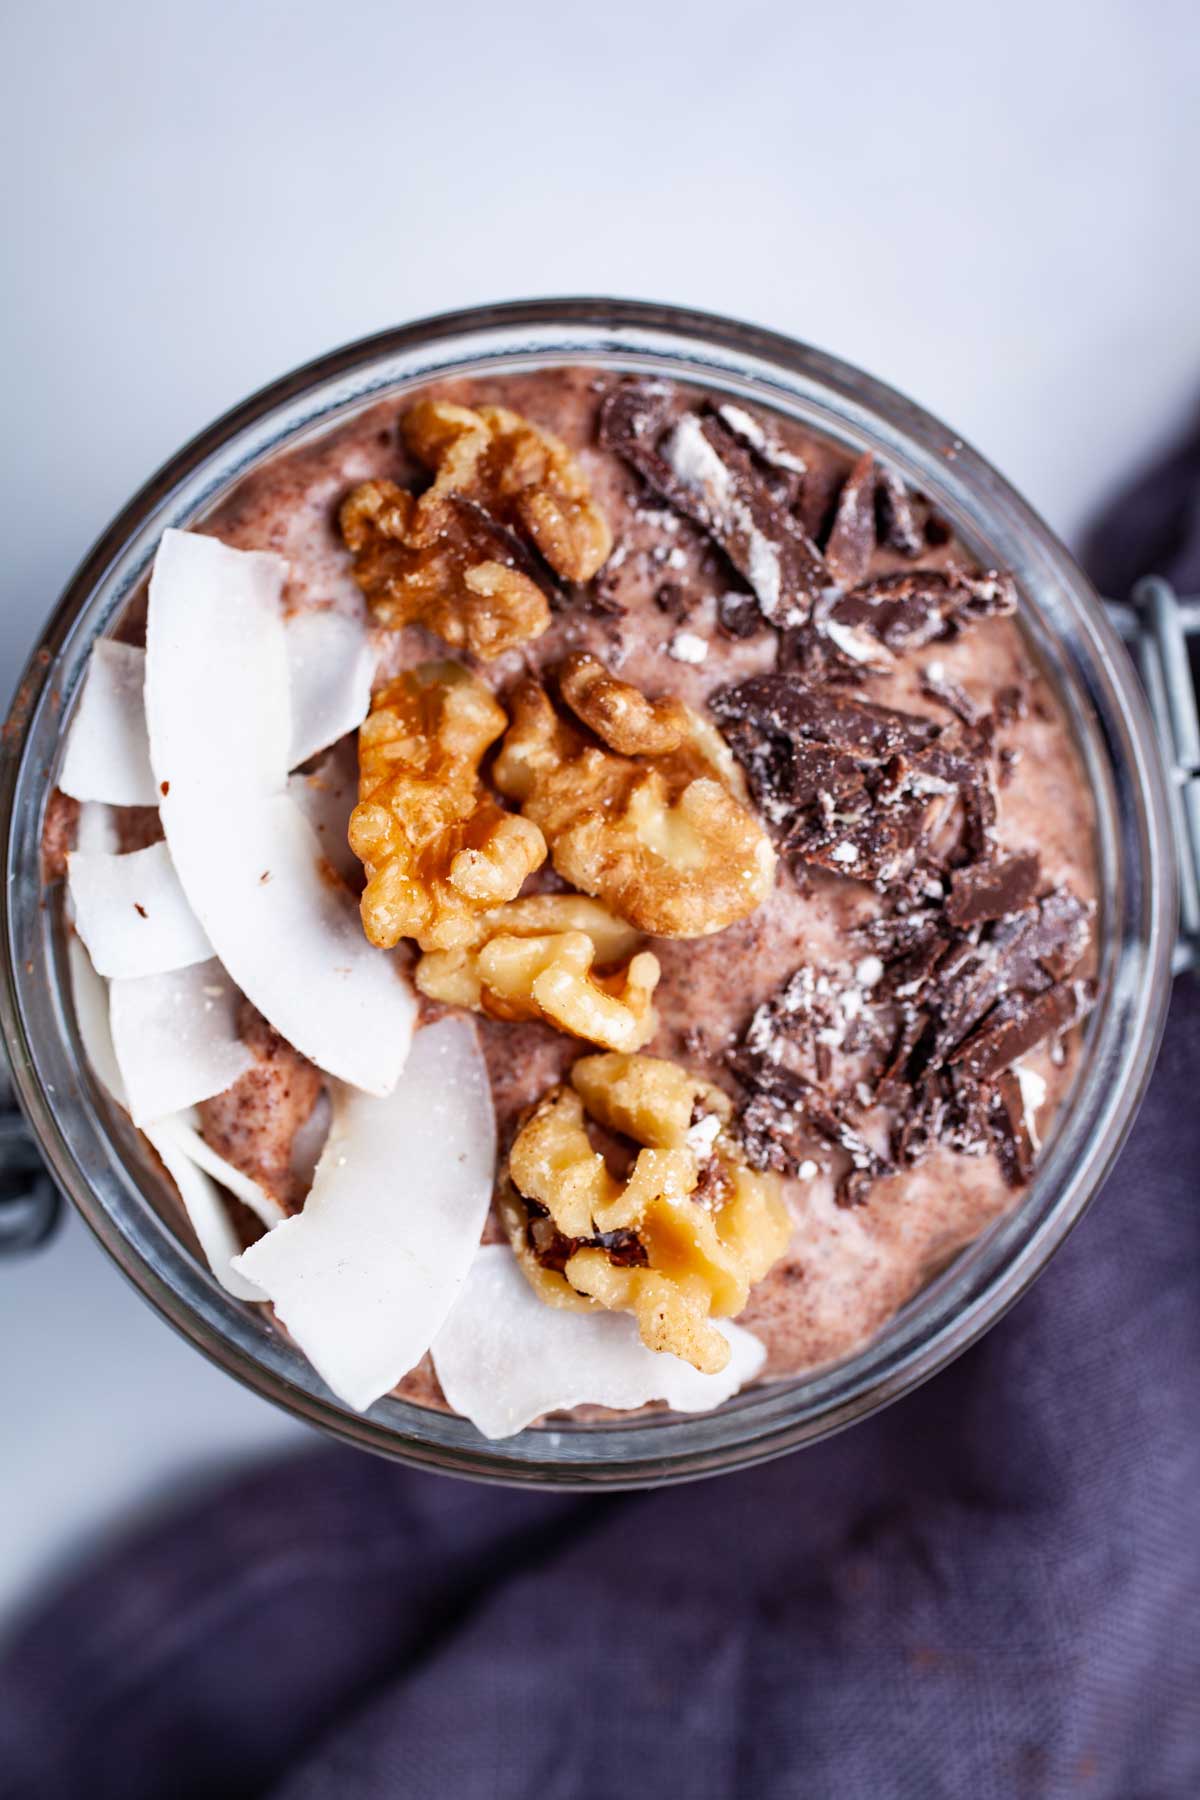 A chocolate chia pudding in a mason jar topped with coconut flakes, walnuts, and dark chocolate bits.